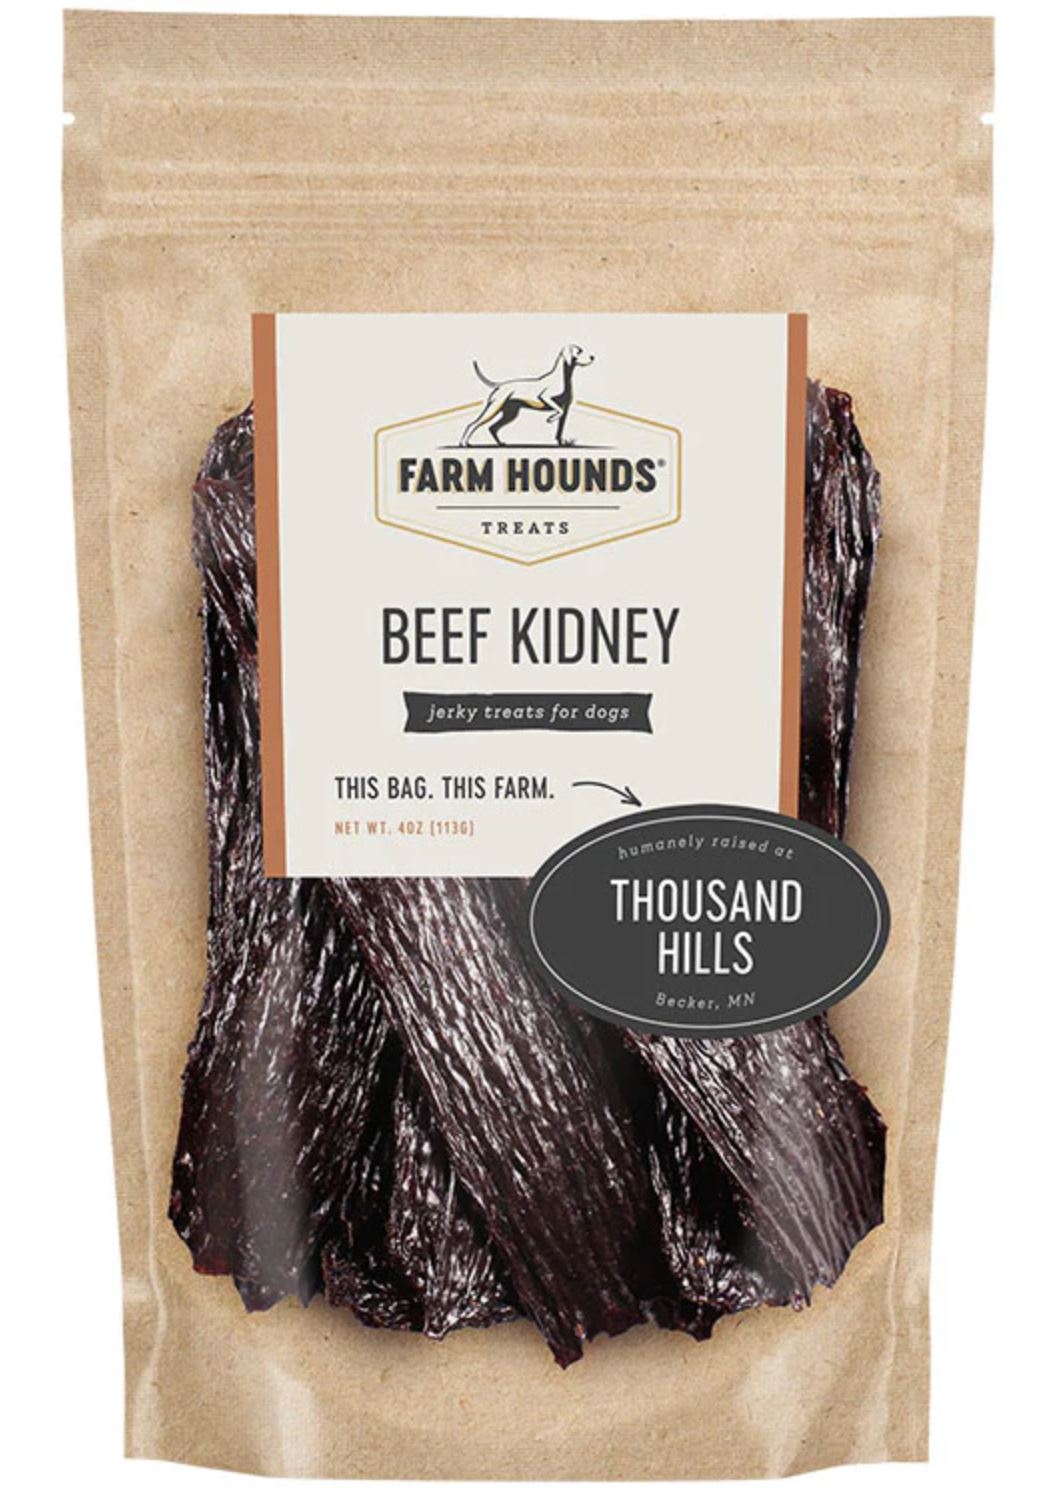 Farm Hounds All Natural Grass-Fed Beef Kidney Dog Treats